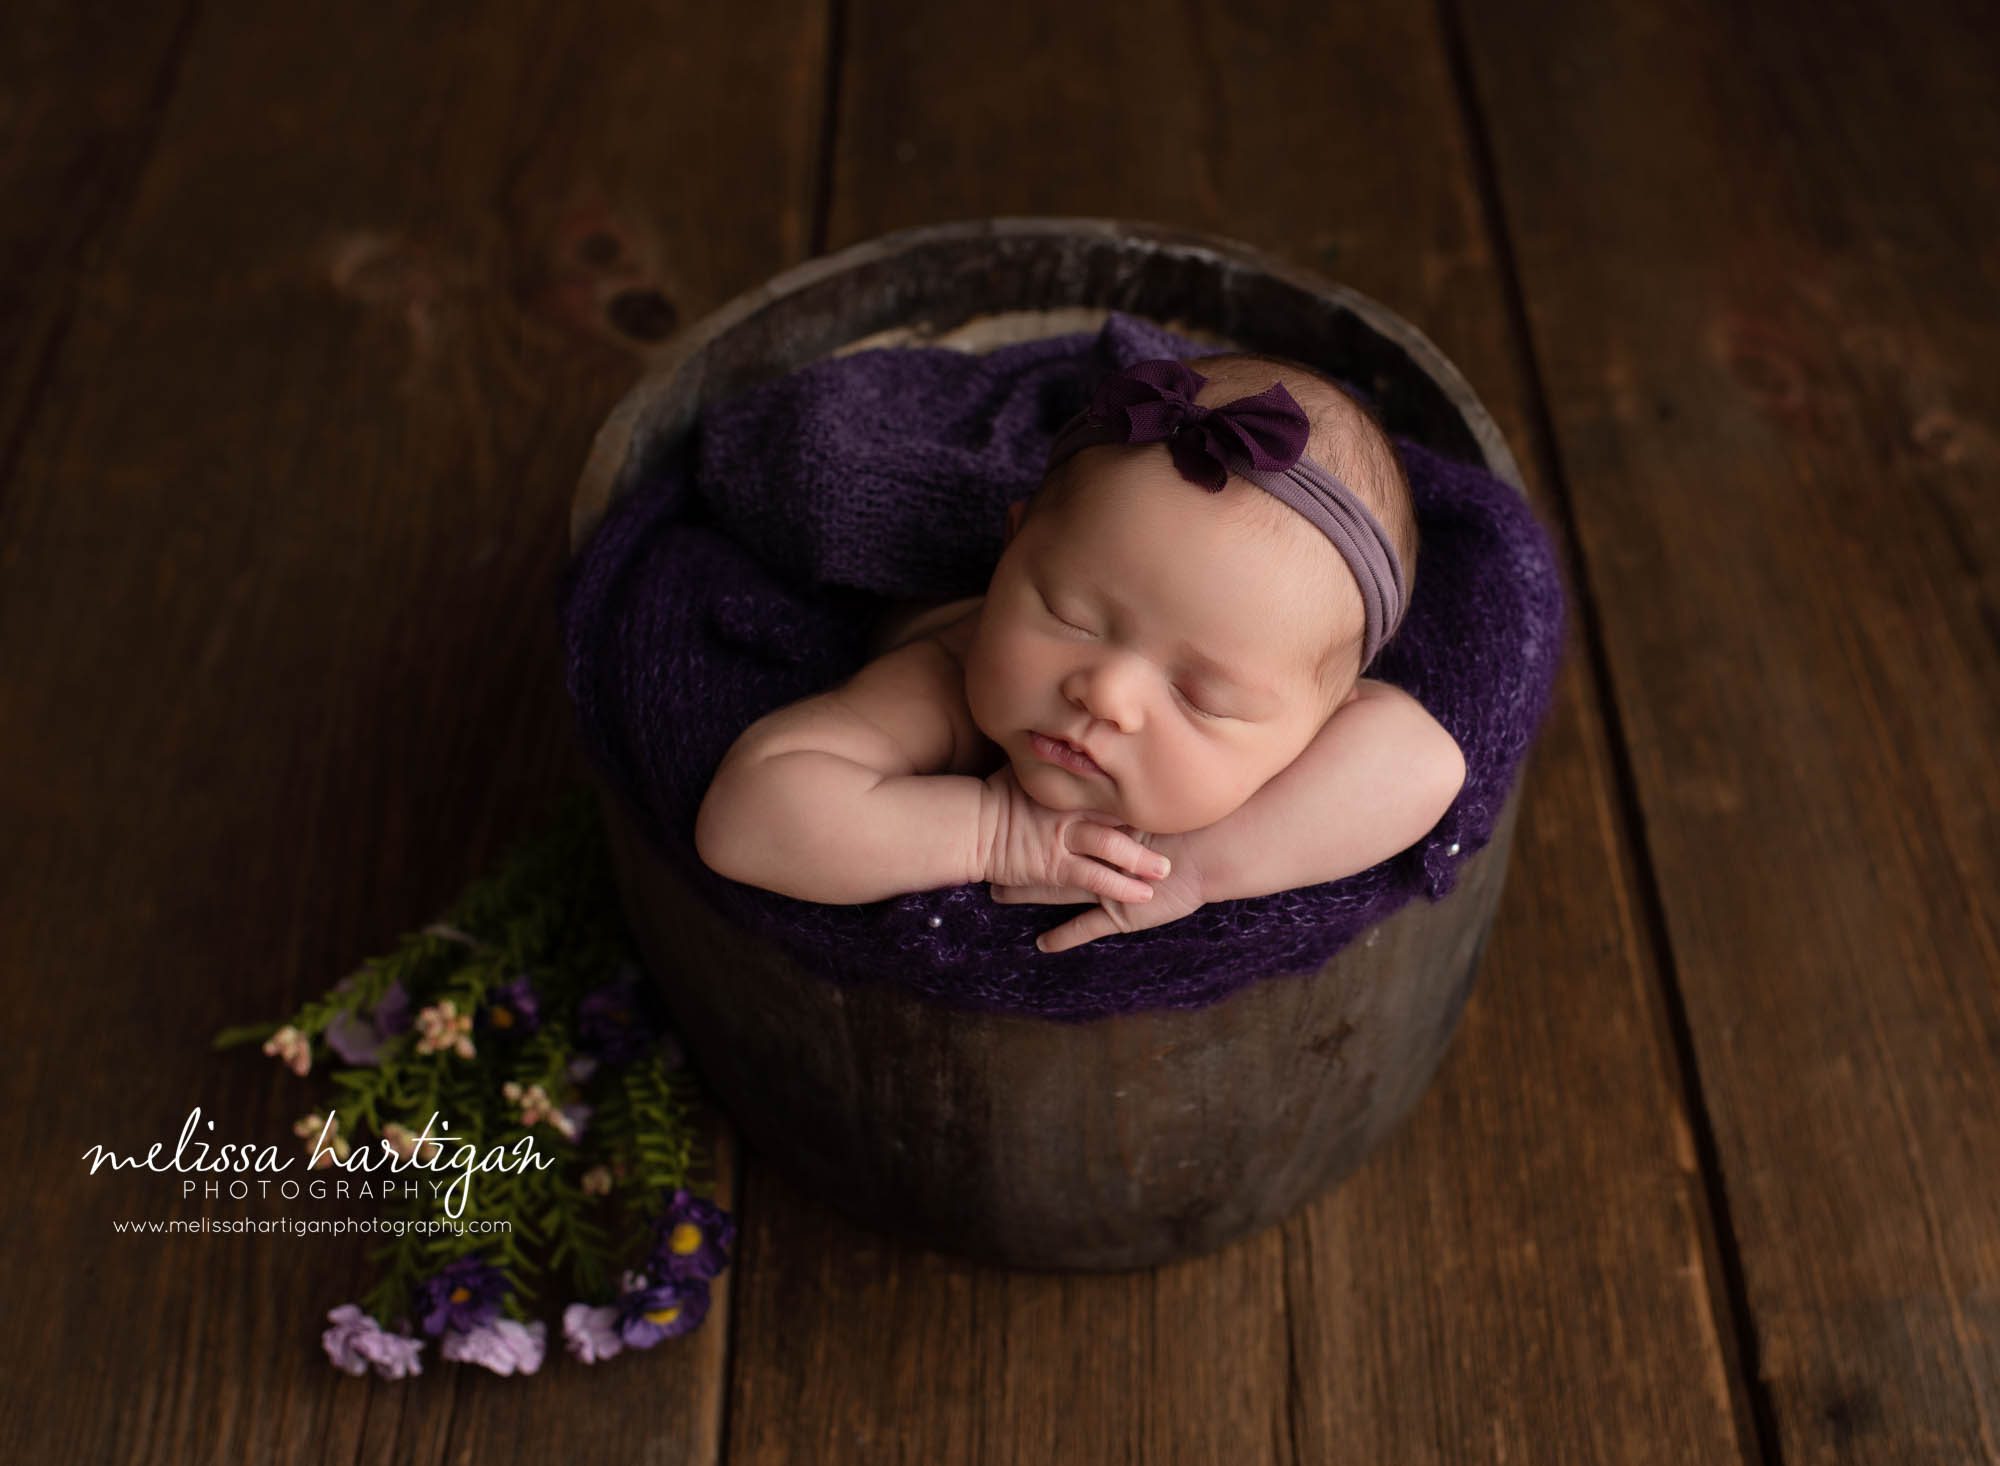 baby girl posed in bucket with purple flowers and purle bow headband